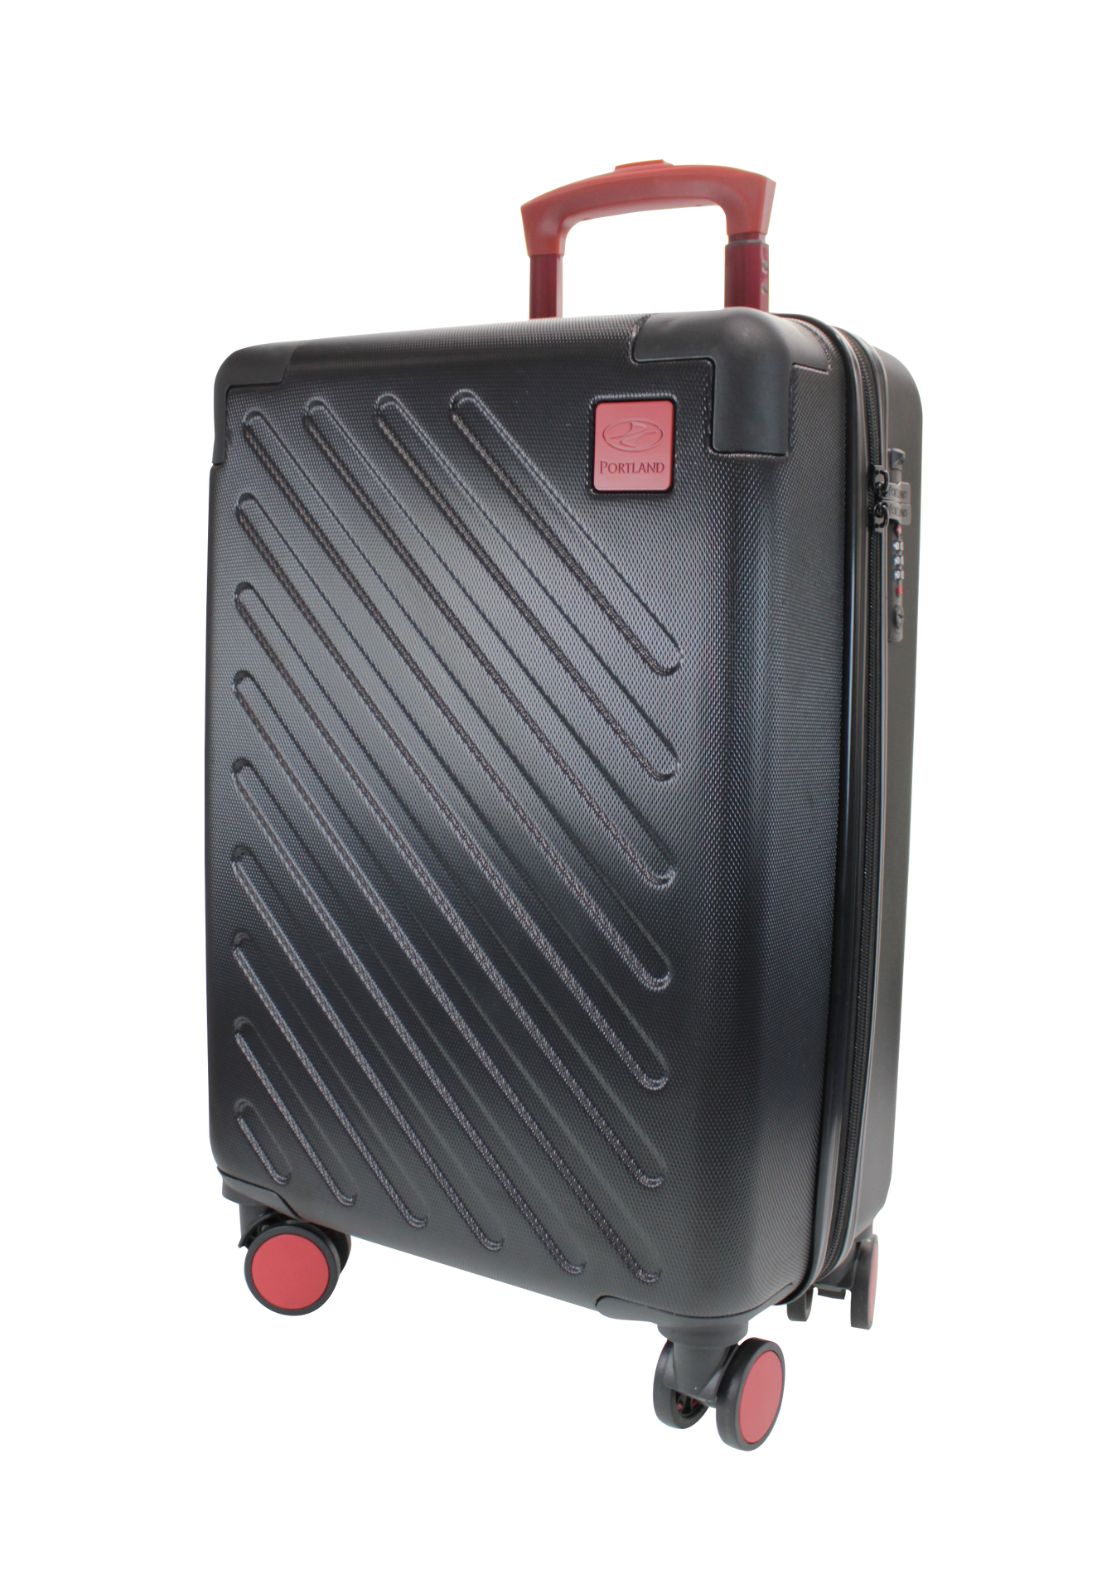 Portland Tokyo Hard Shell Cabin Luggage 2 Shaws Department Stores